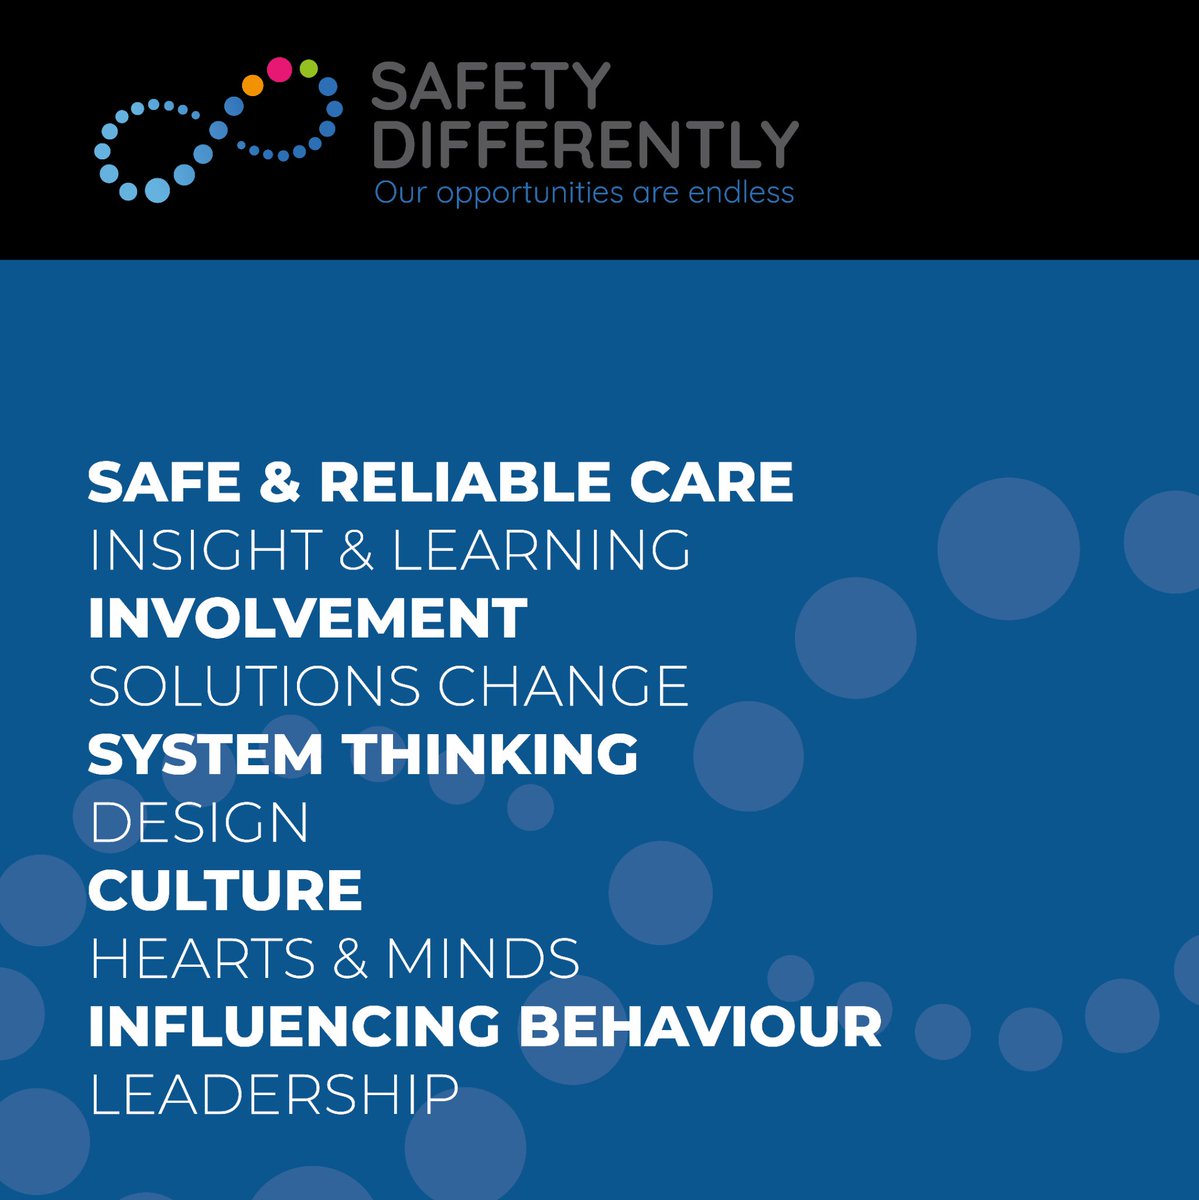 We're nearly there....launching 'safety differently' across @MFTnhs in July to support our implementation of PSIRF in September @DougalAtkinson @rmjenner @alisonlynch65 @HumanFactorsAc1